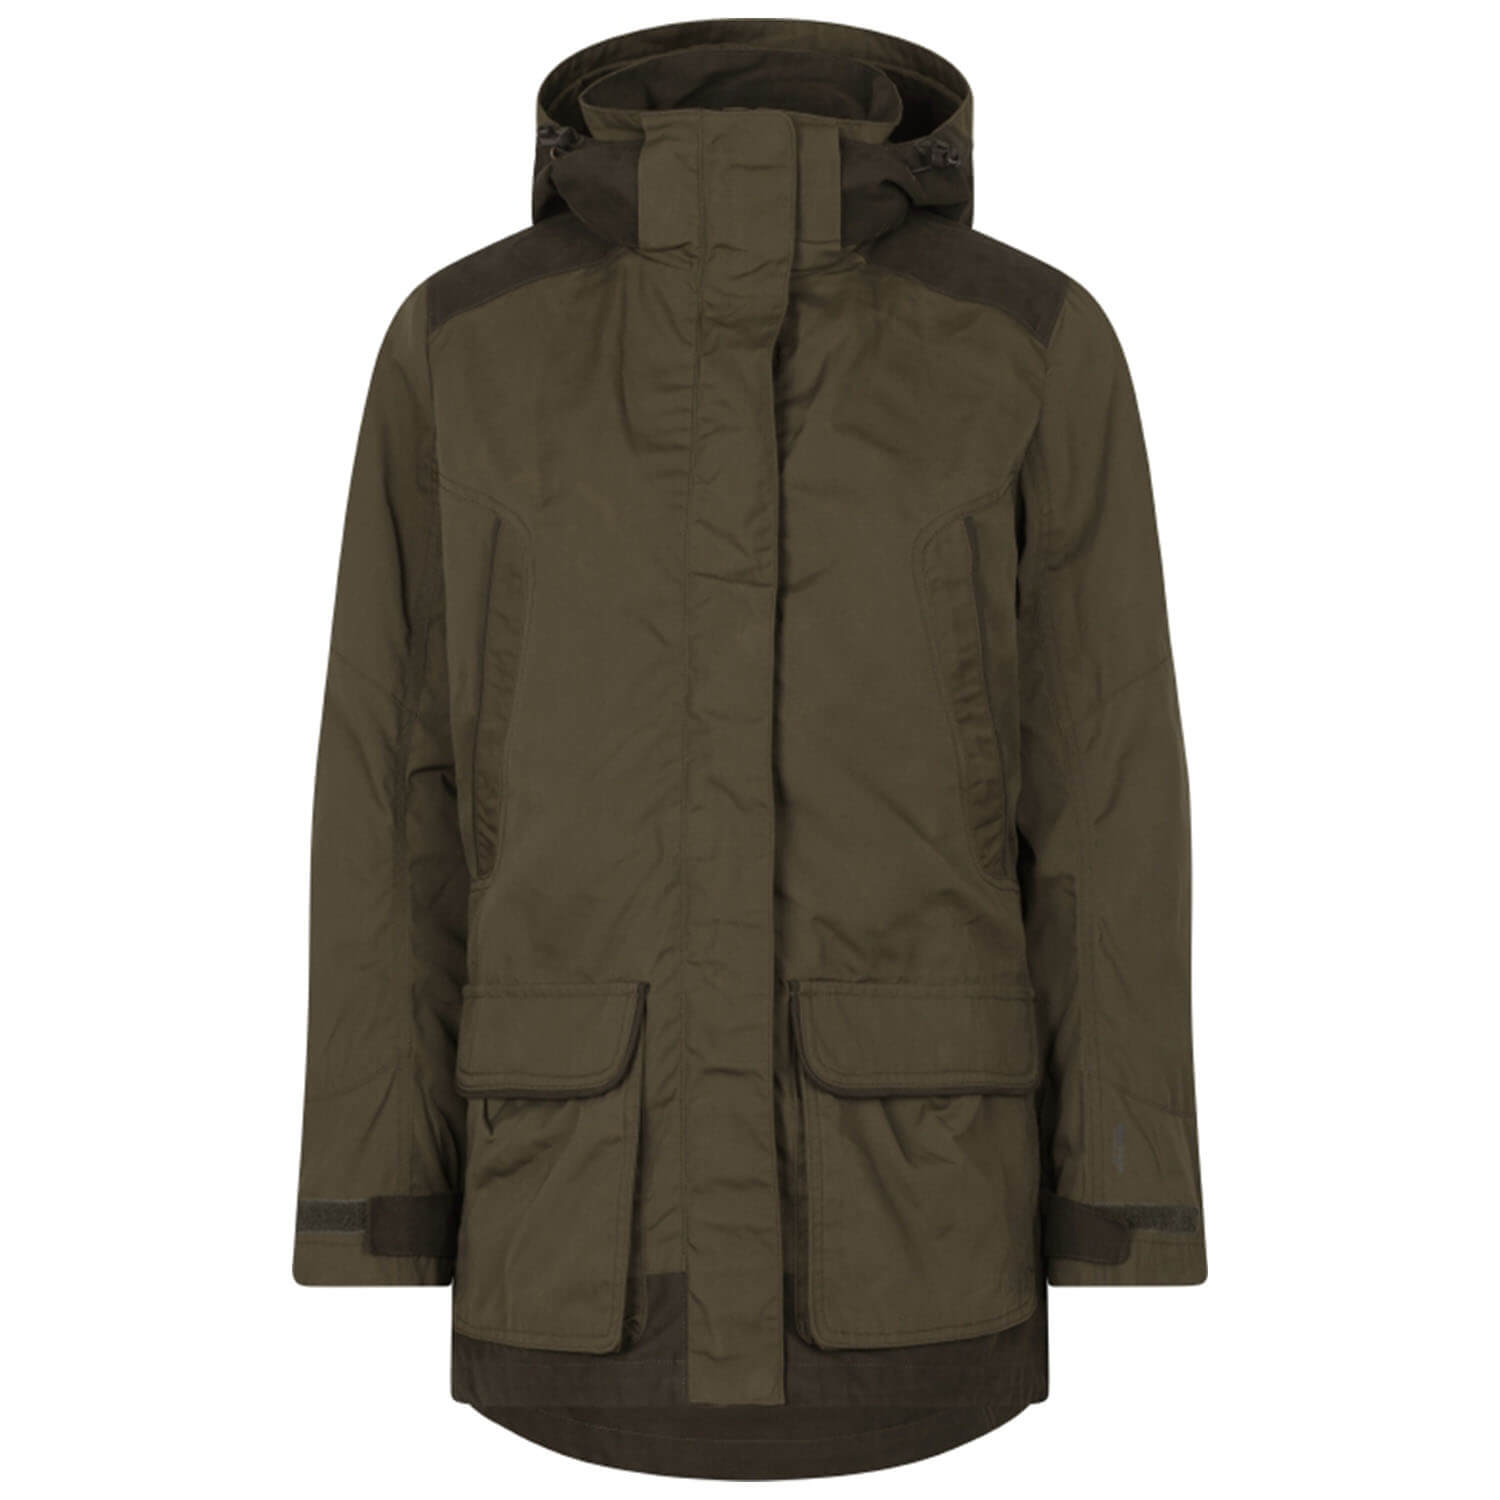 Seeland womenjacket keypoint kora (Pine Green/Grizzly Brown) - Women's Hunting Clothing 